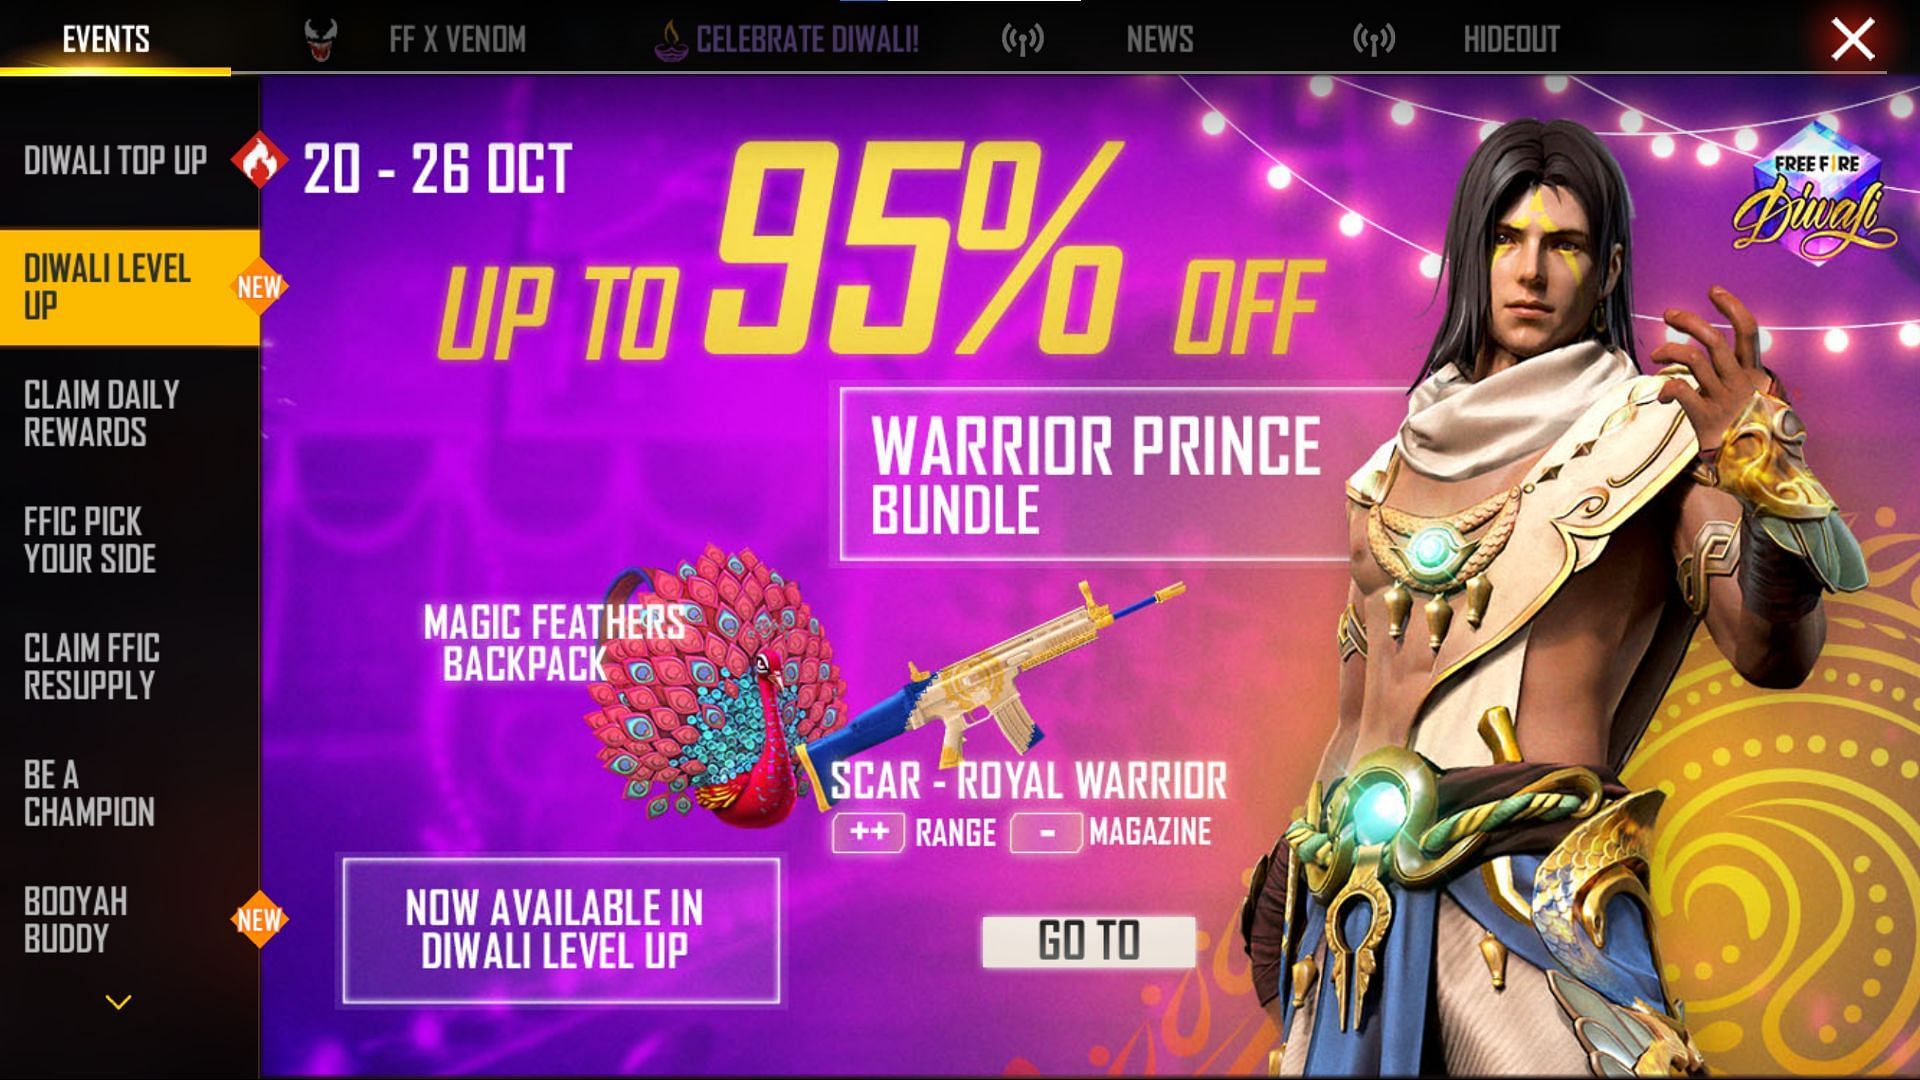 Diwali Level Up event in Free Fire (Image via Free Fire)